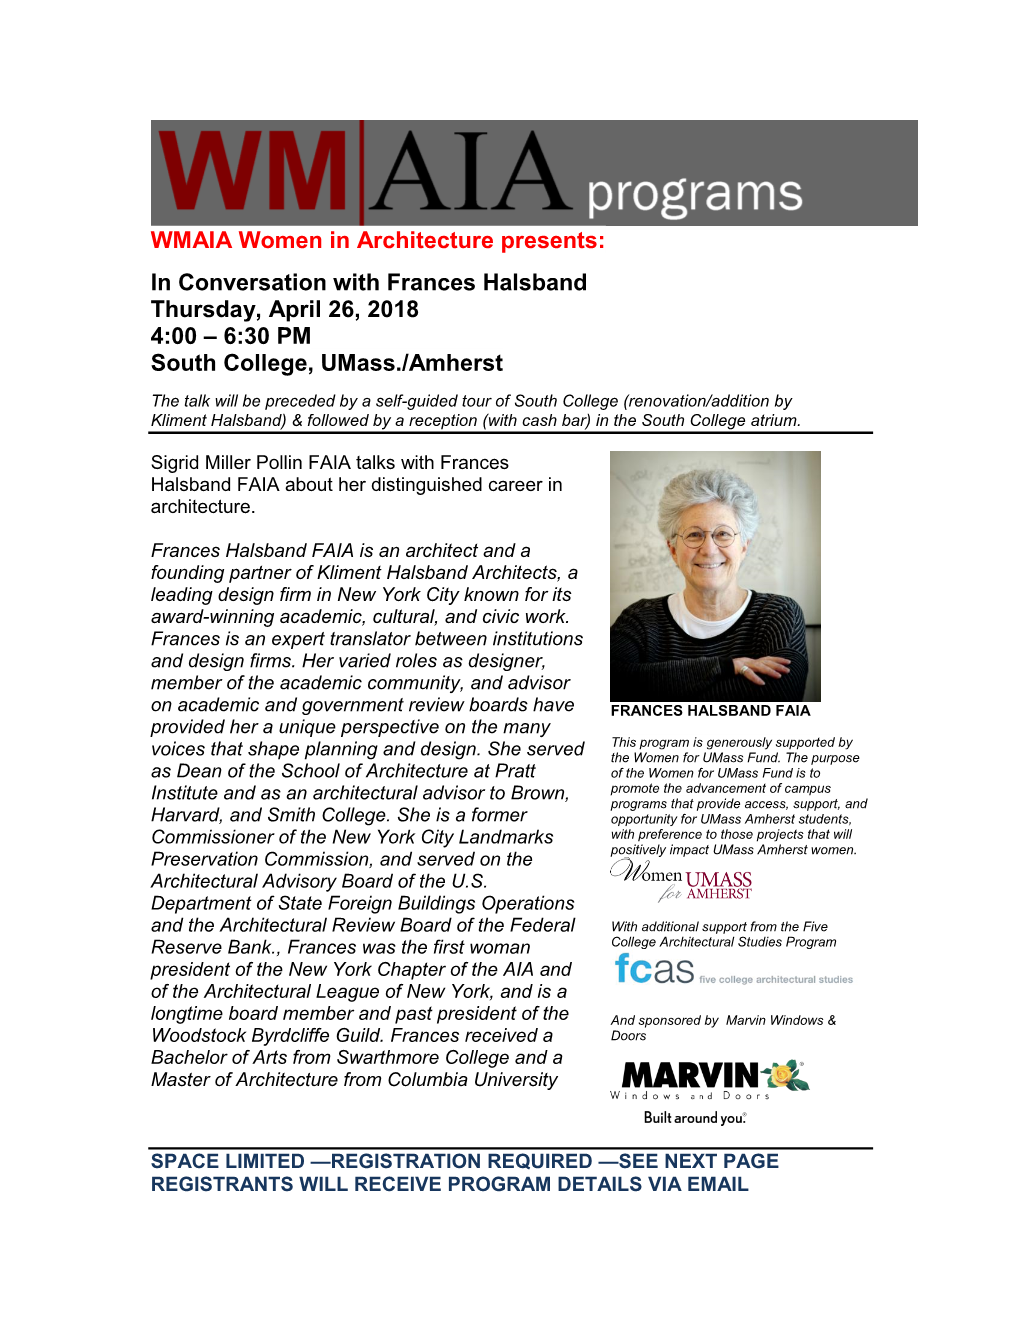 WMAIA Women in Architecture Presents: in Conversation With